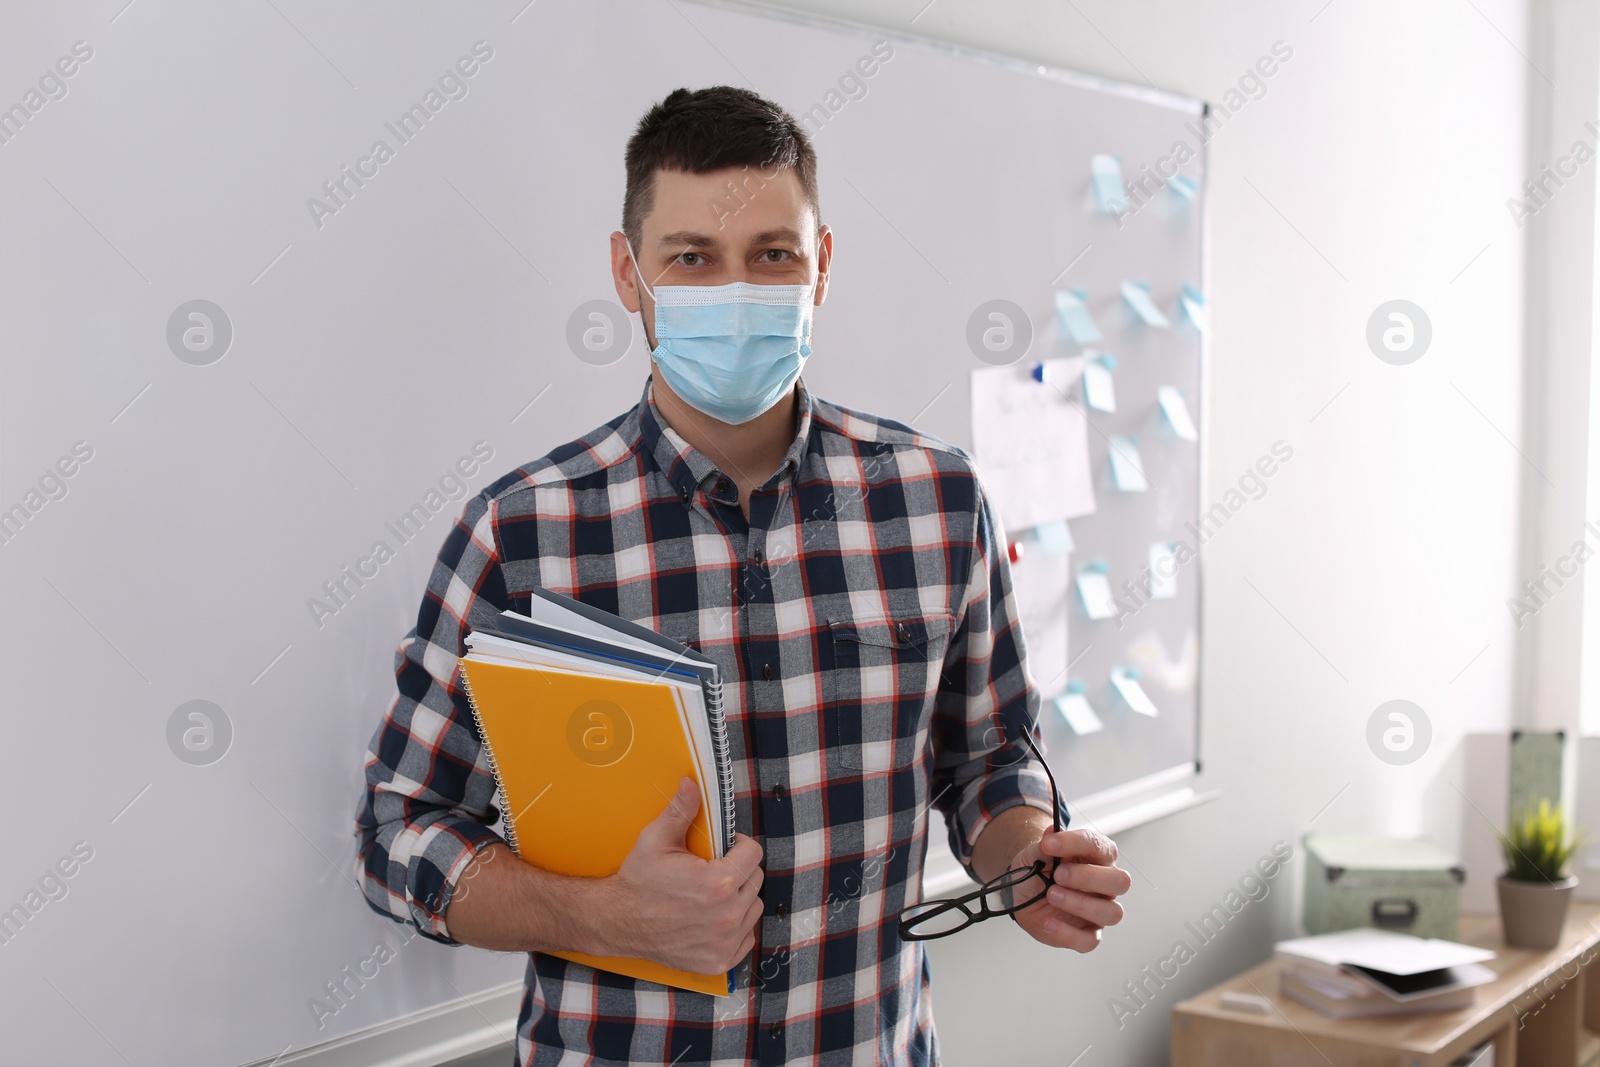 Photo of Teacher with protective mask, glasses and copybooks near board in classroom. Reopening after Covid-19 quarantine